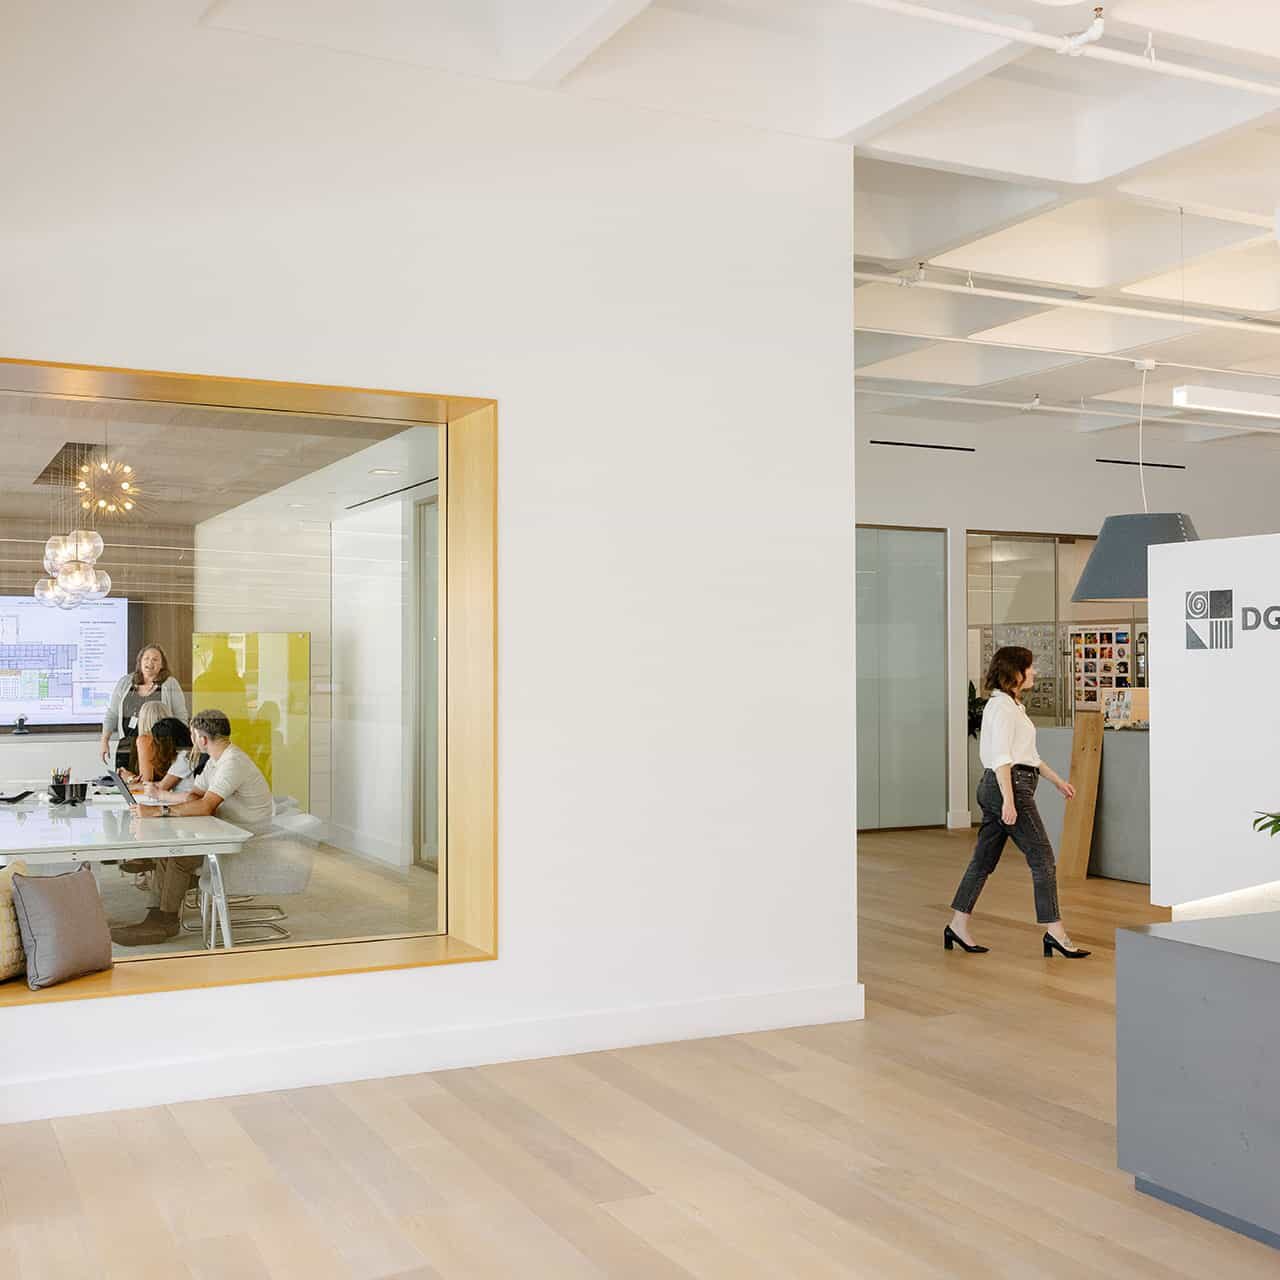 The inside of the DGA San Diego suite includes a modern office space with clean, white walls and large windows